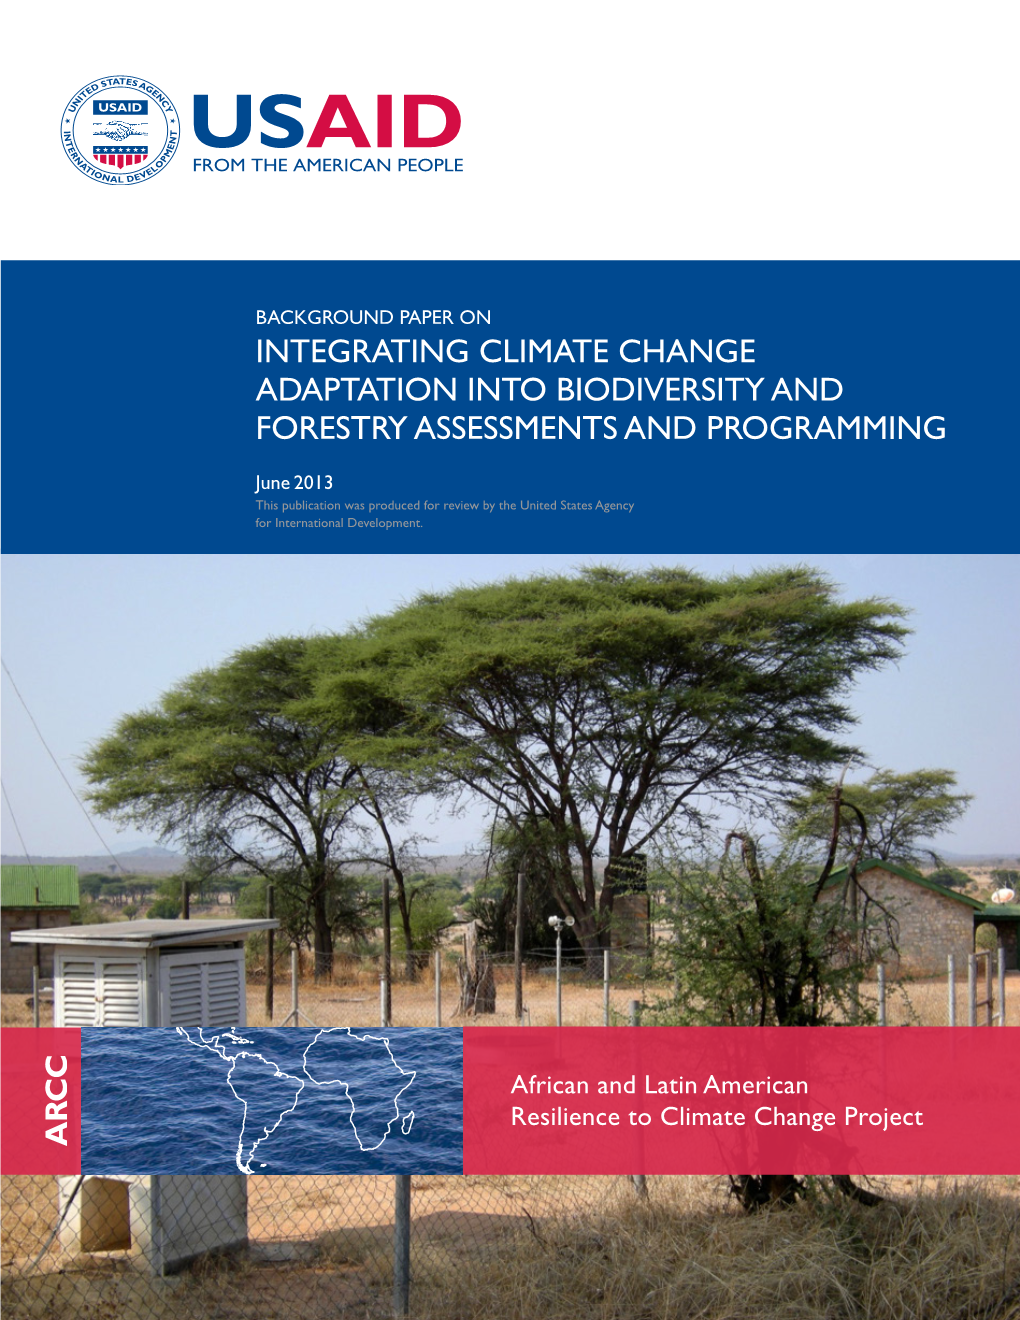 Integrating Climate Change Adaptation Into Biodiversity and Forestry Assessments and Programming